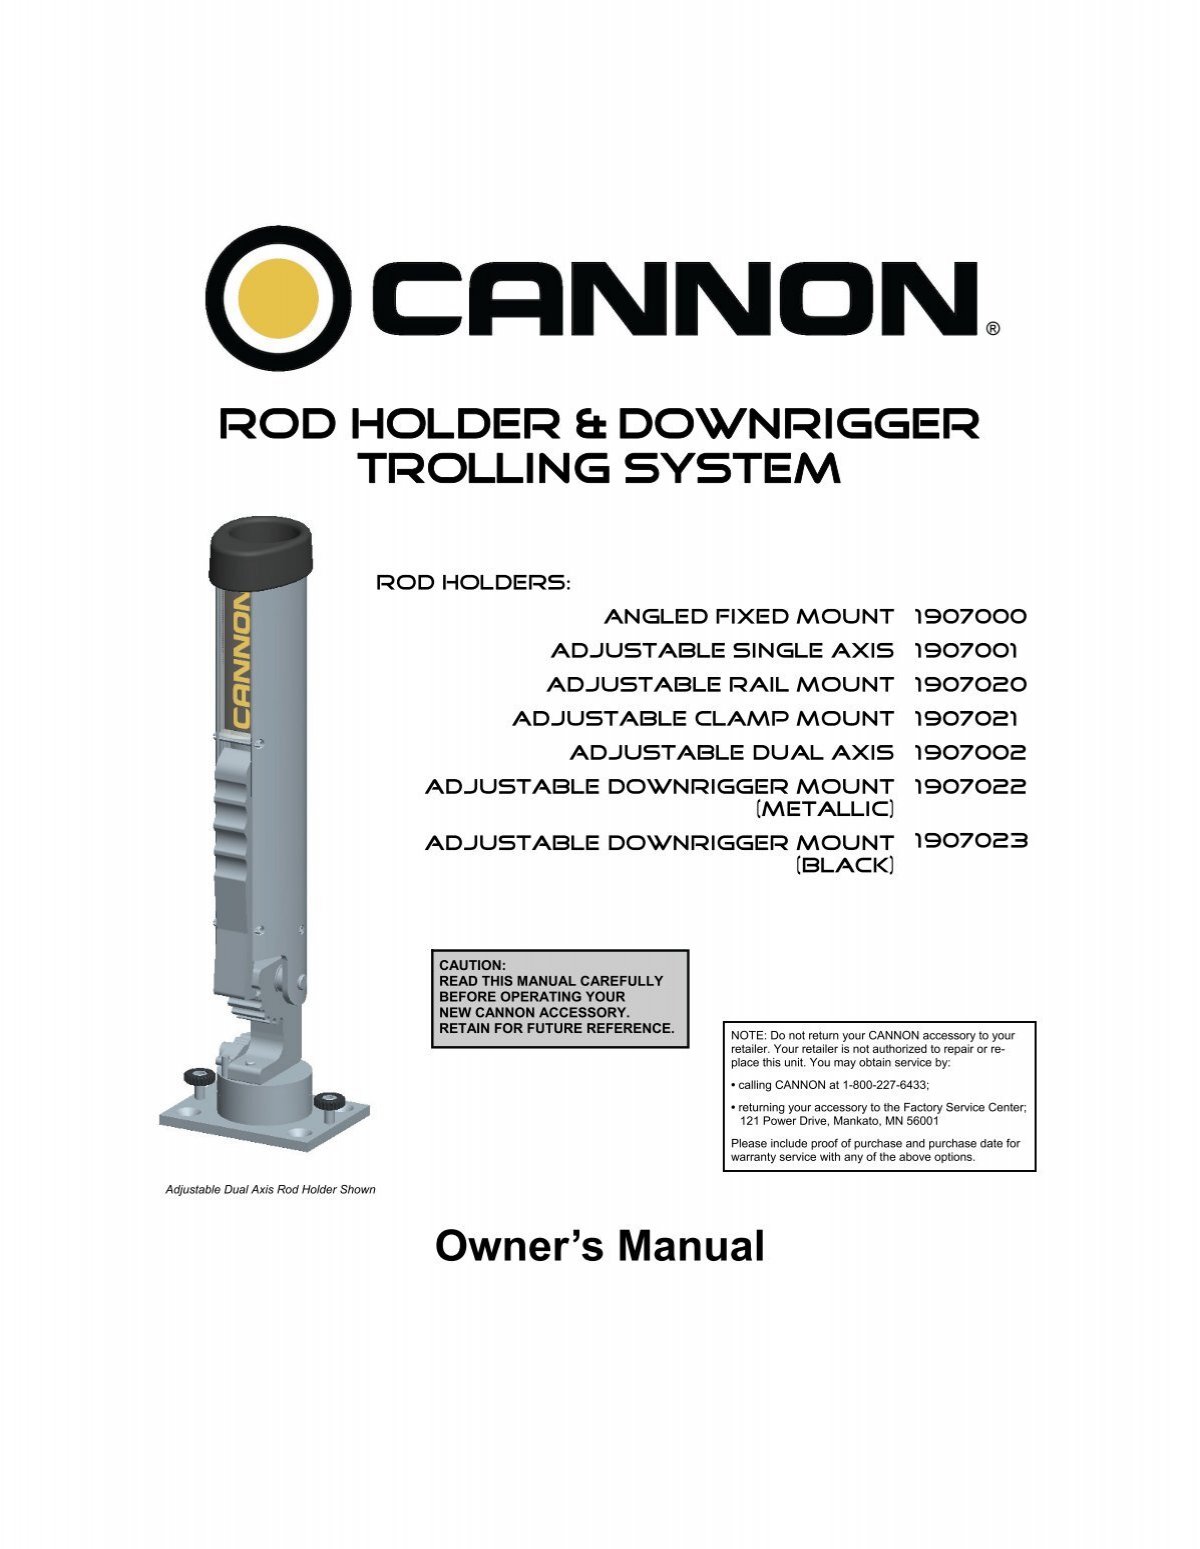 Cannon Three-Position Adjustable Rod Holder Overview, Johnnie Candle  breaks down the Cannon Three-Position Adjustable Rod Holder, its important  features, and how he uses it on the water. Johnnie prefers this